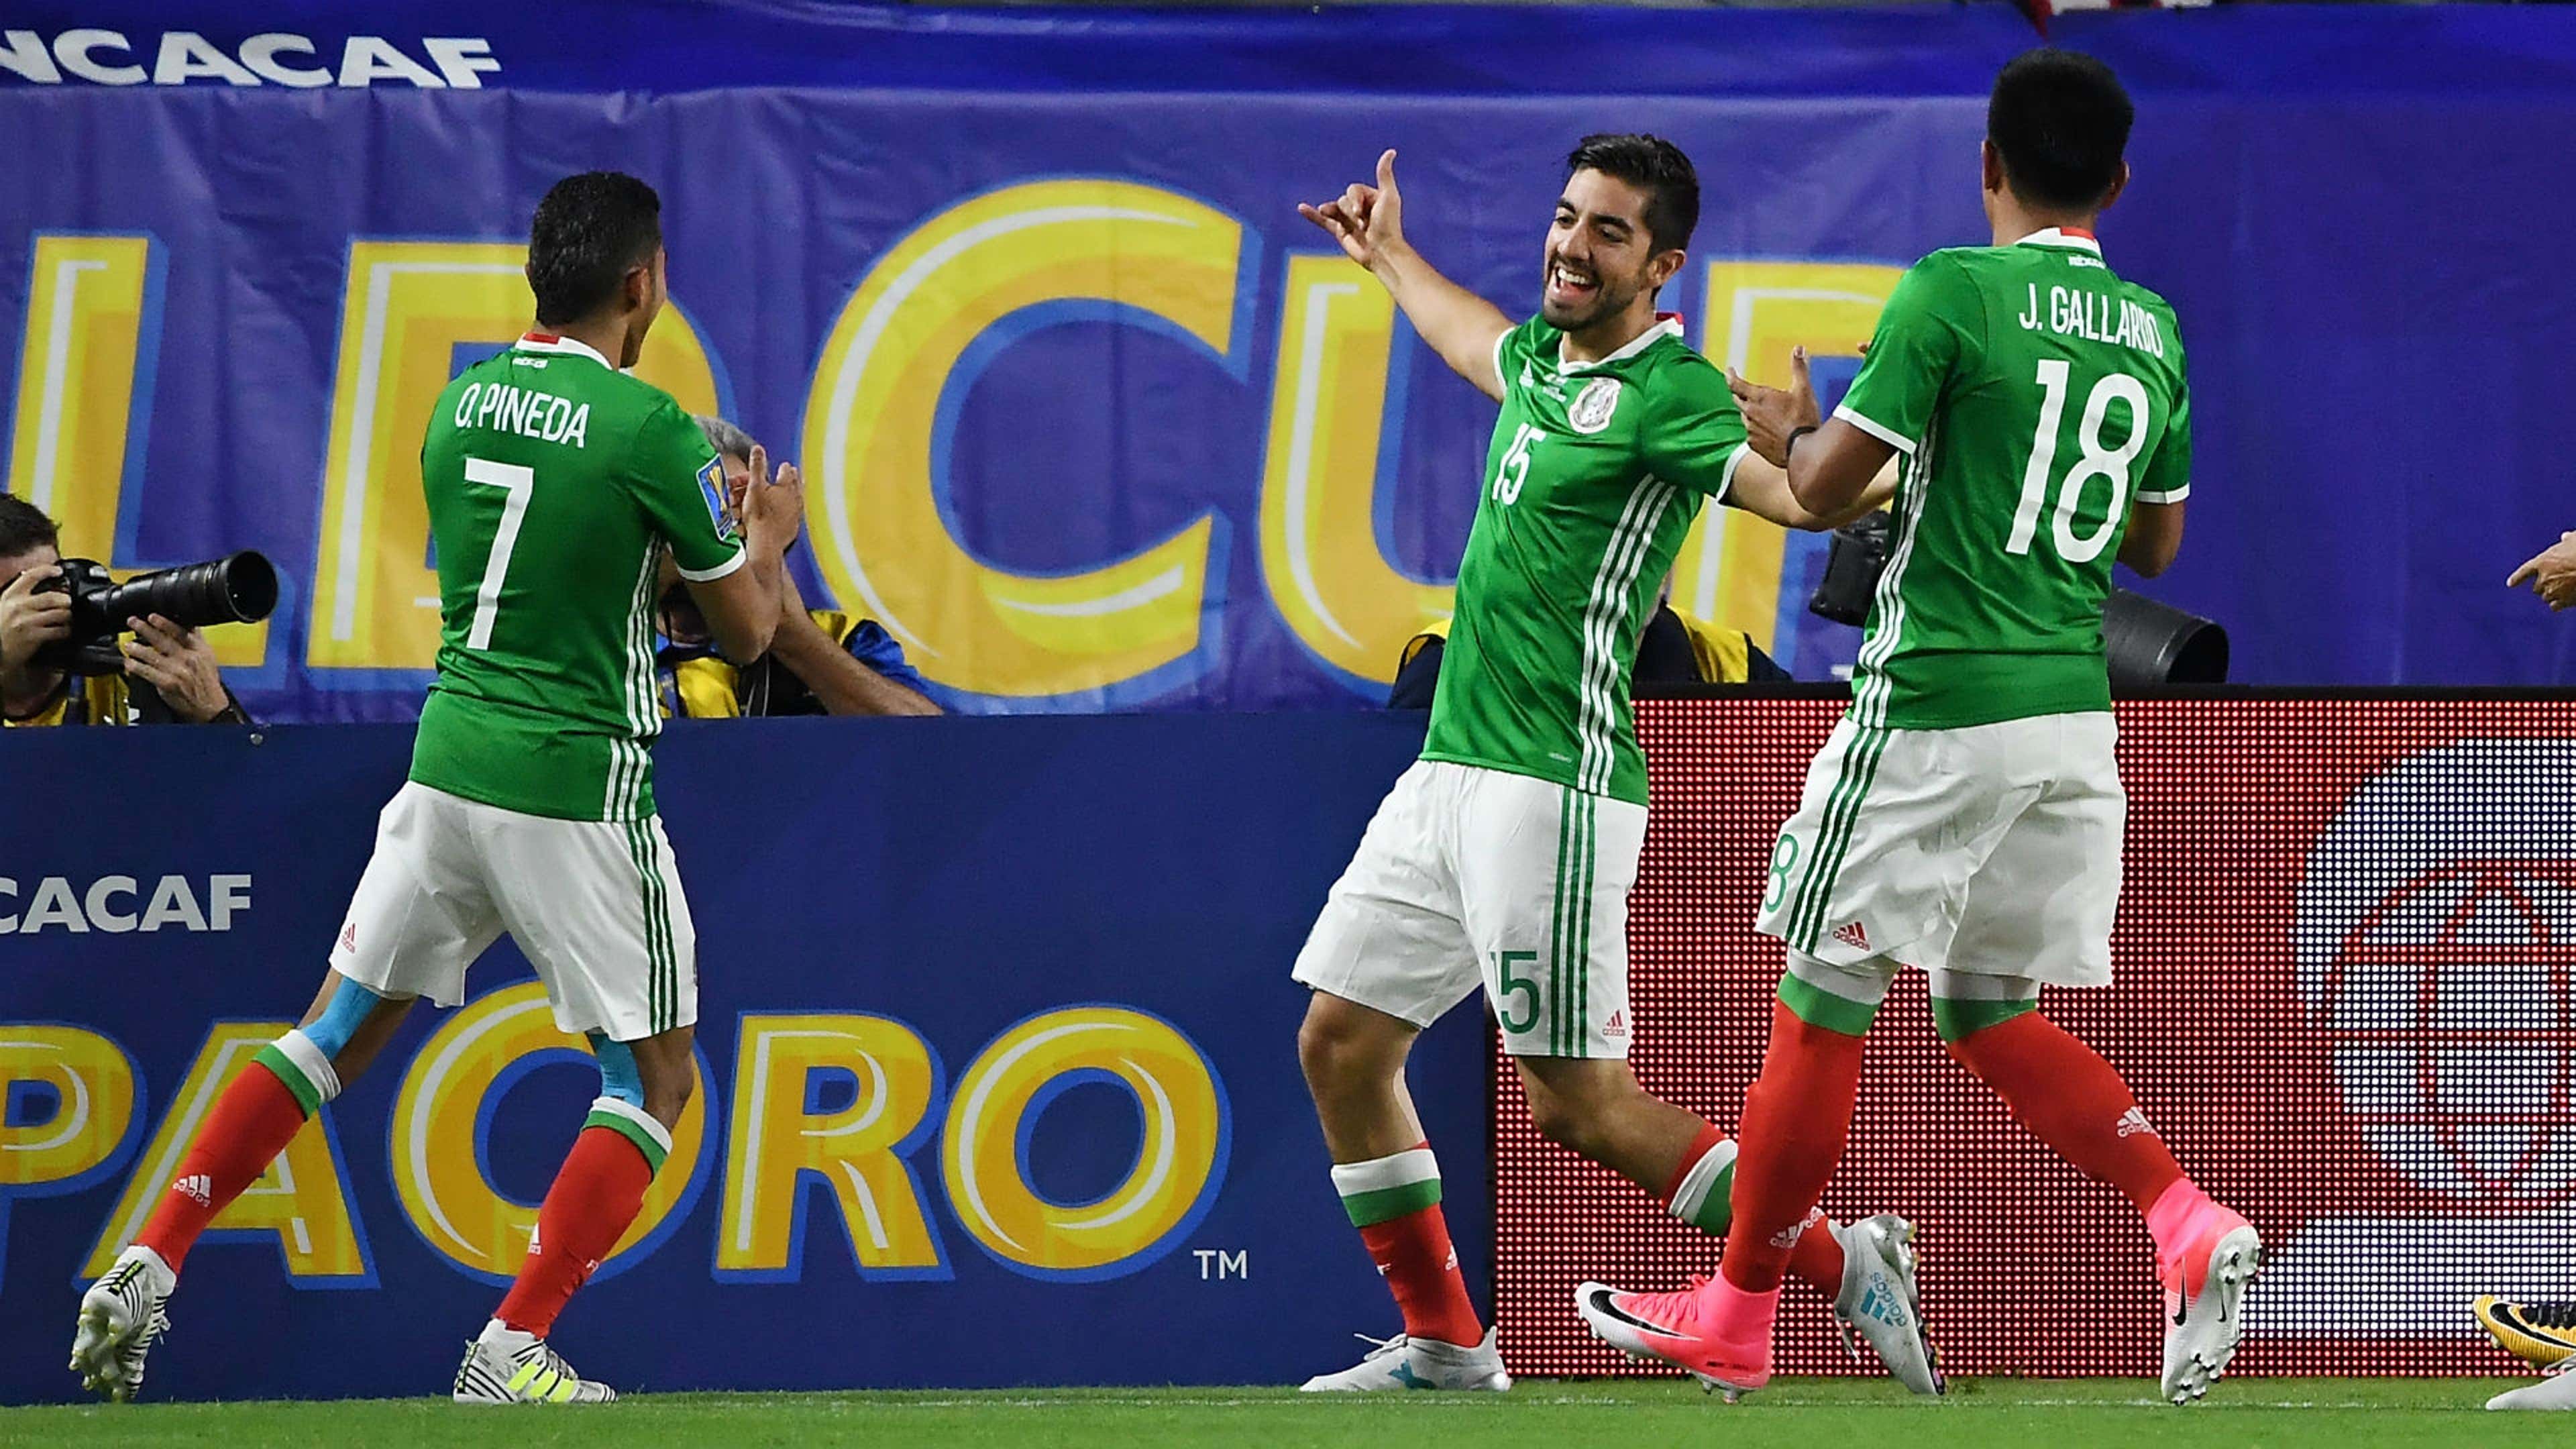 Gold Cup: Mexico's one goal enough to beat woeful Honduras | Goal.com US